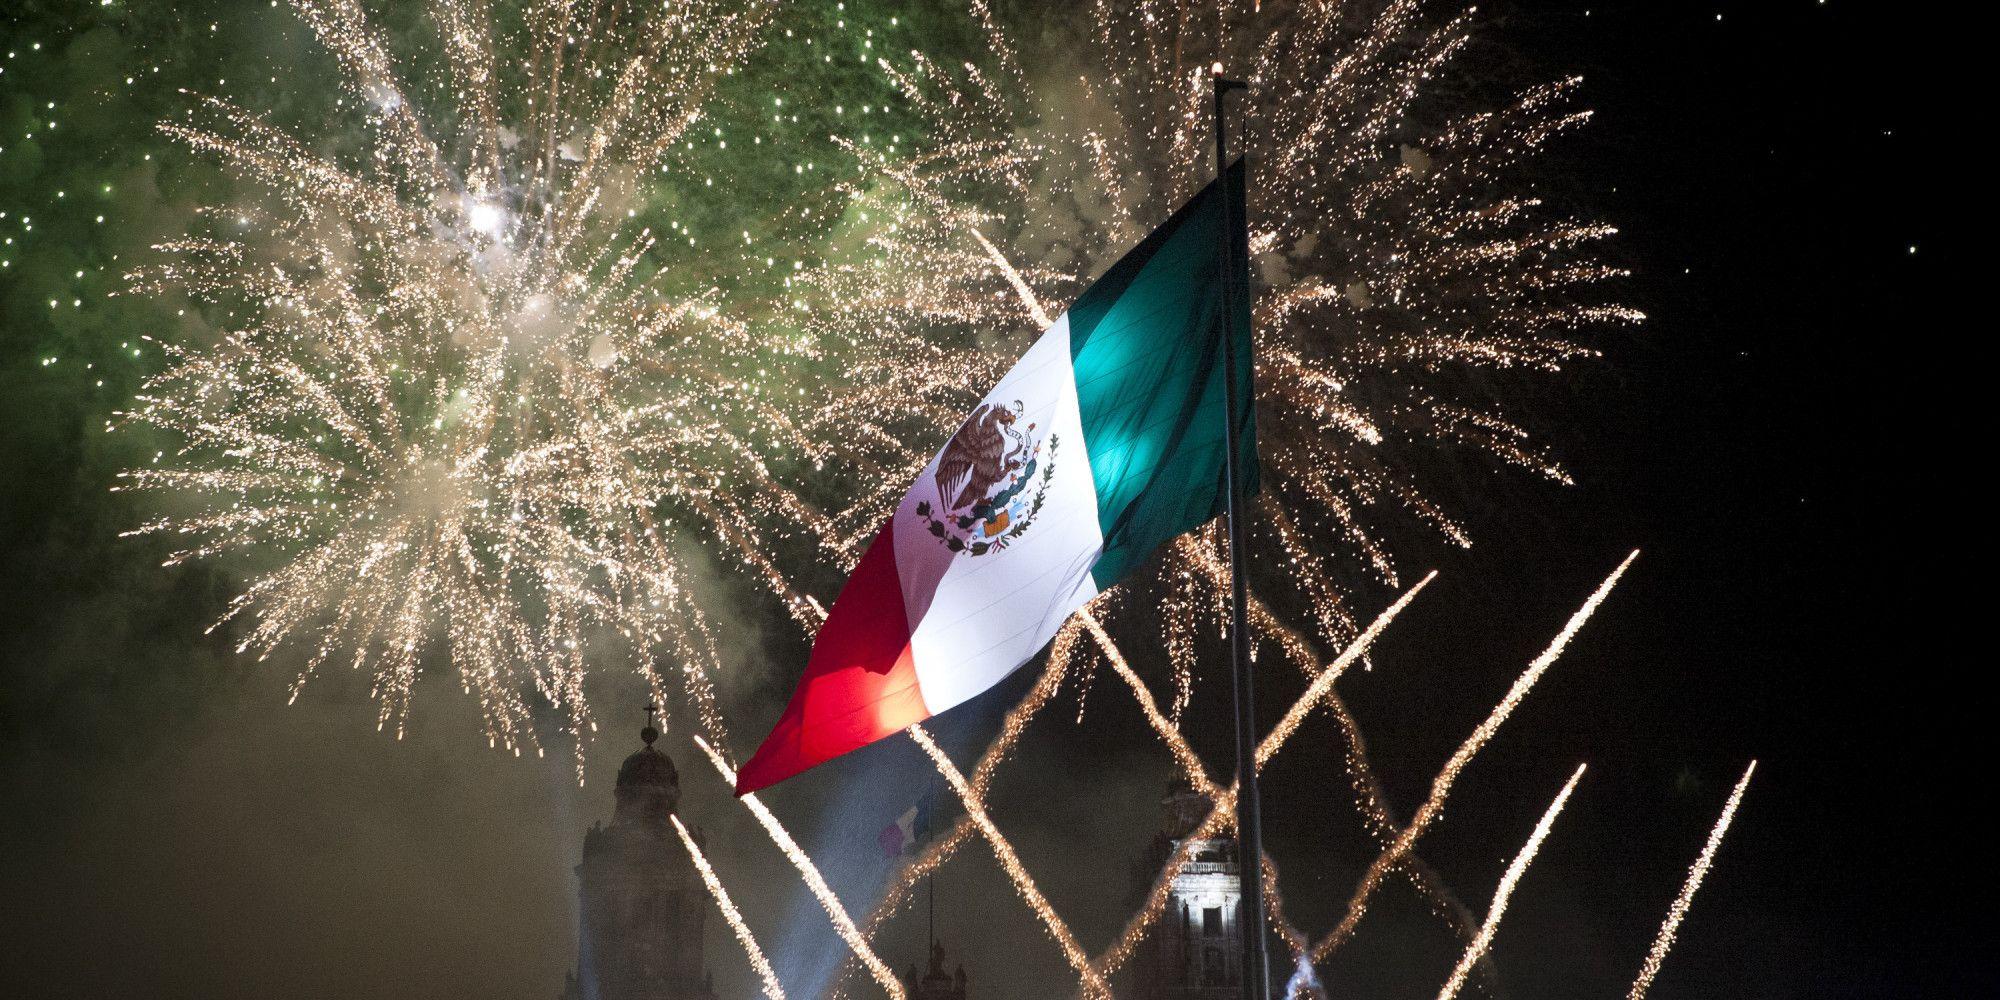 Celebrations of Mexico's Independence Day